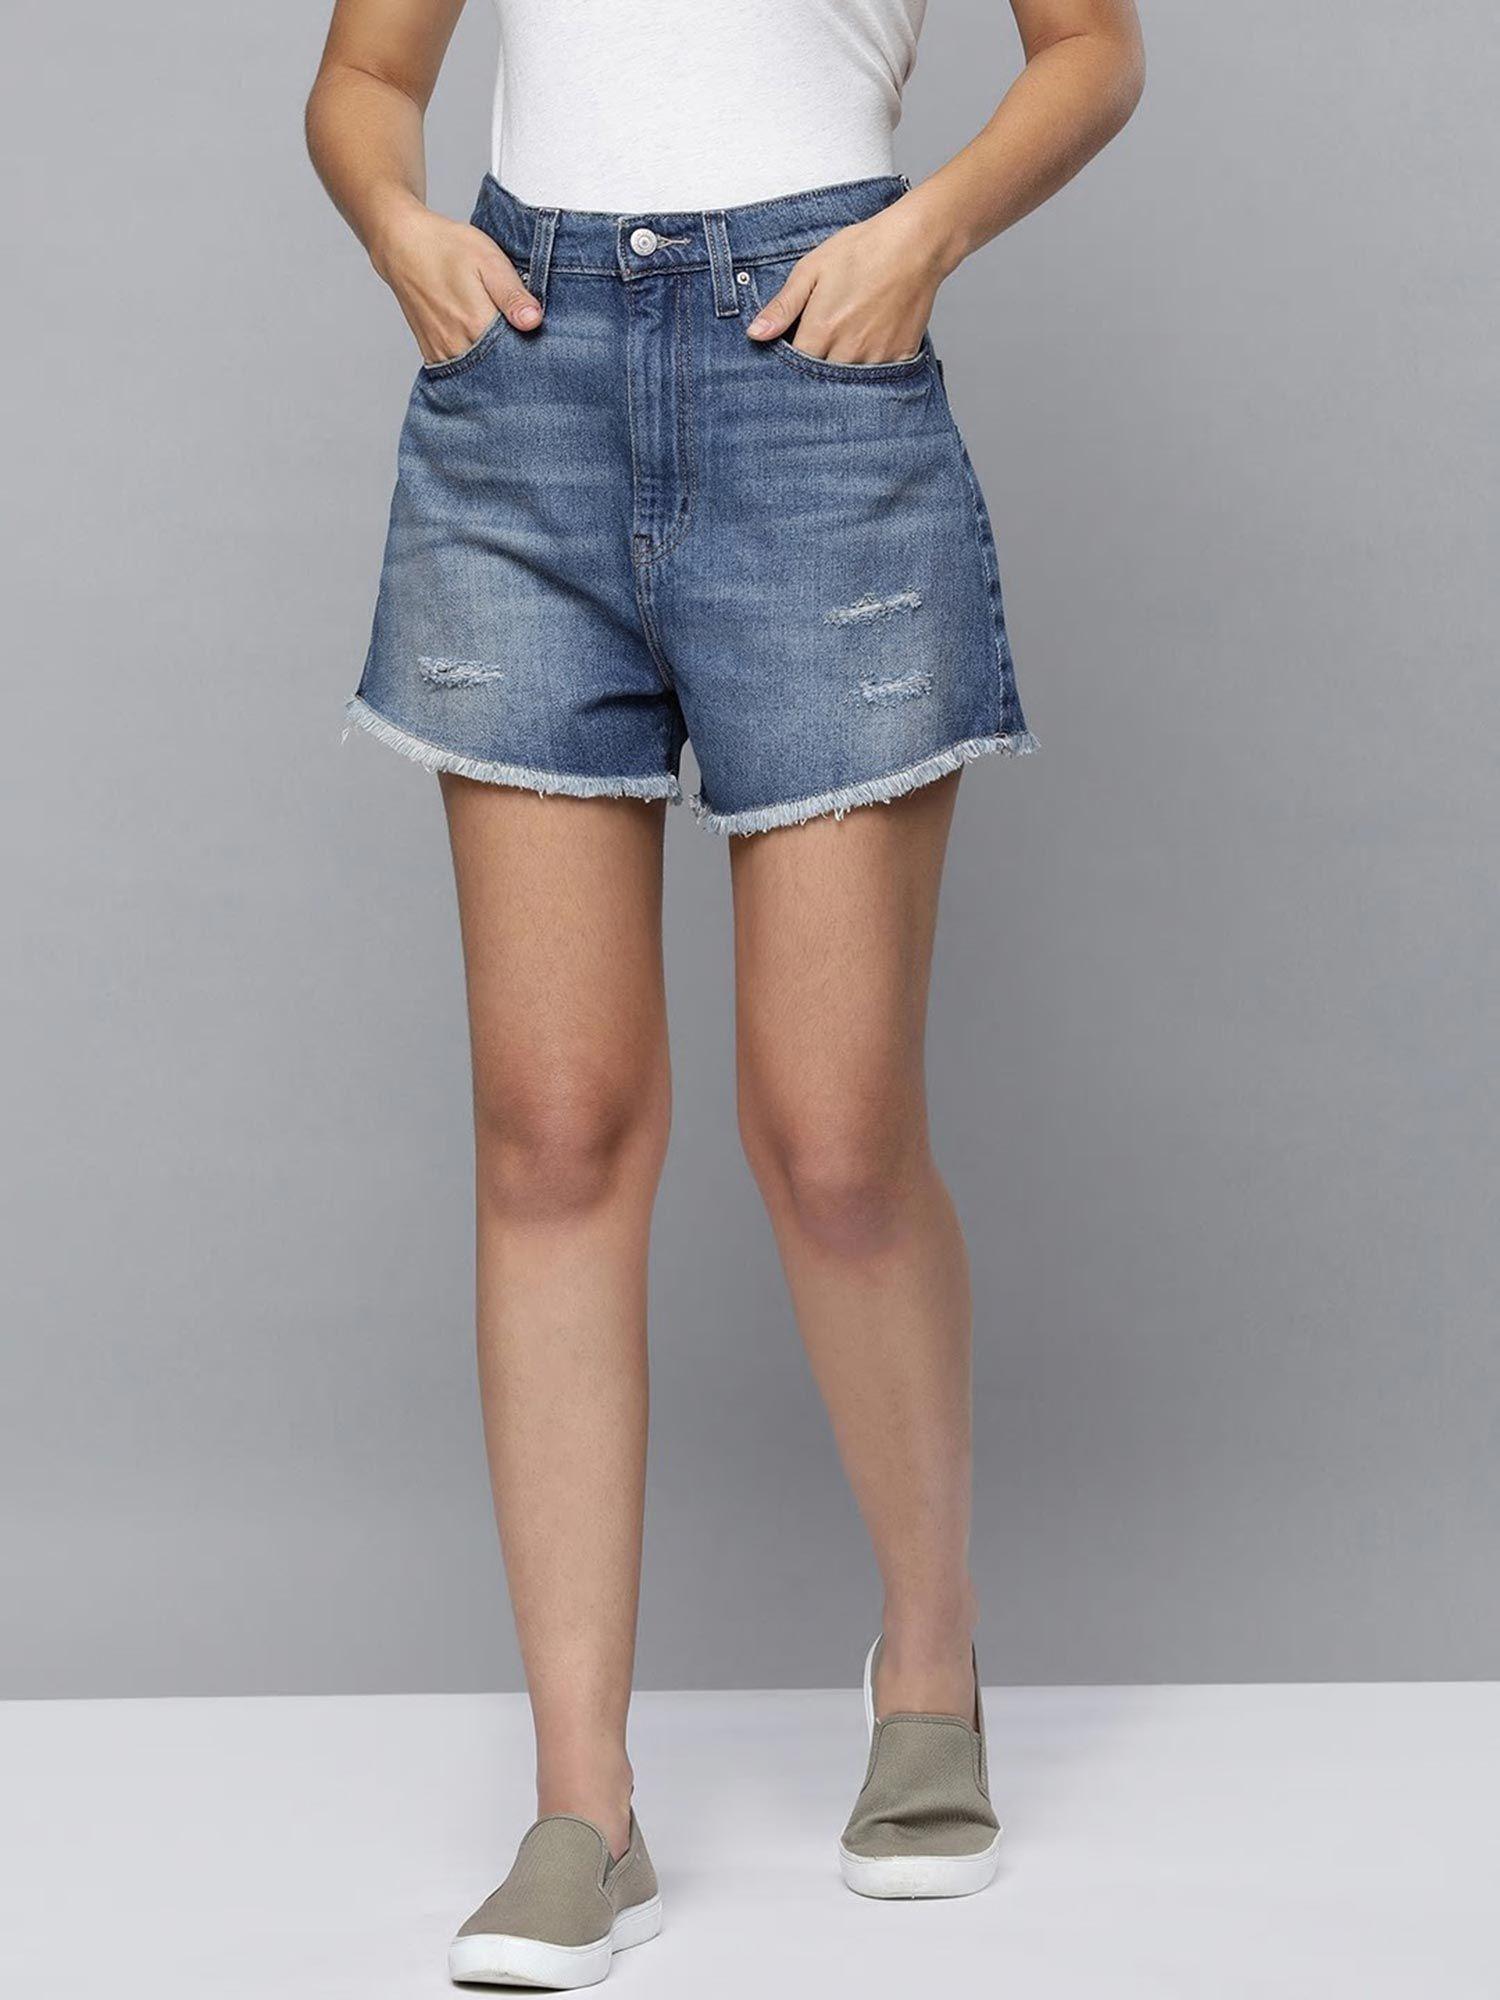 shorts blue loose fit high rise shorts